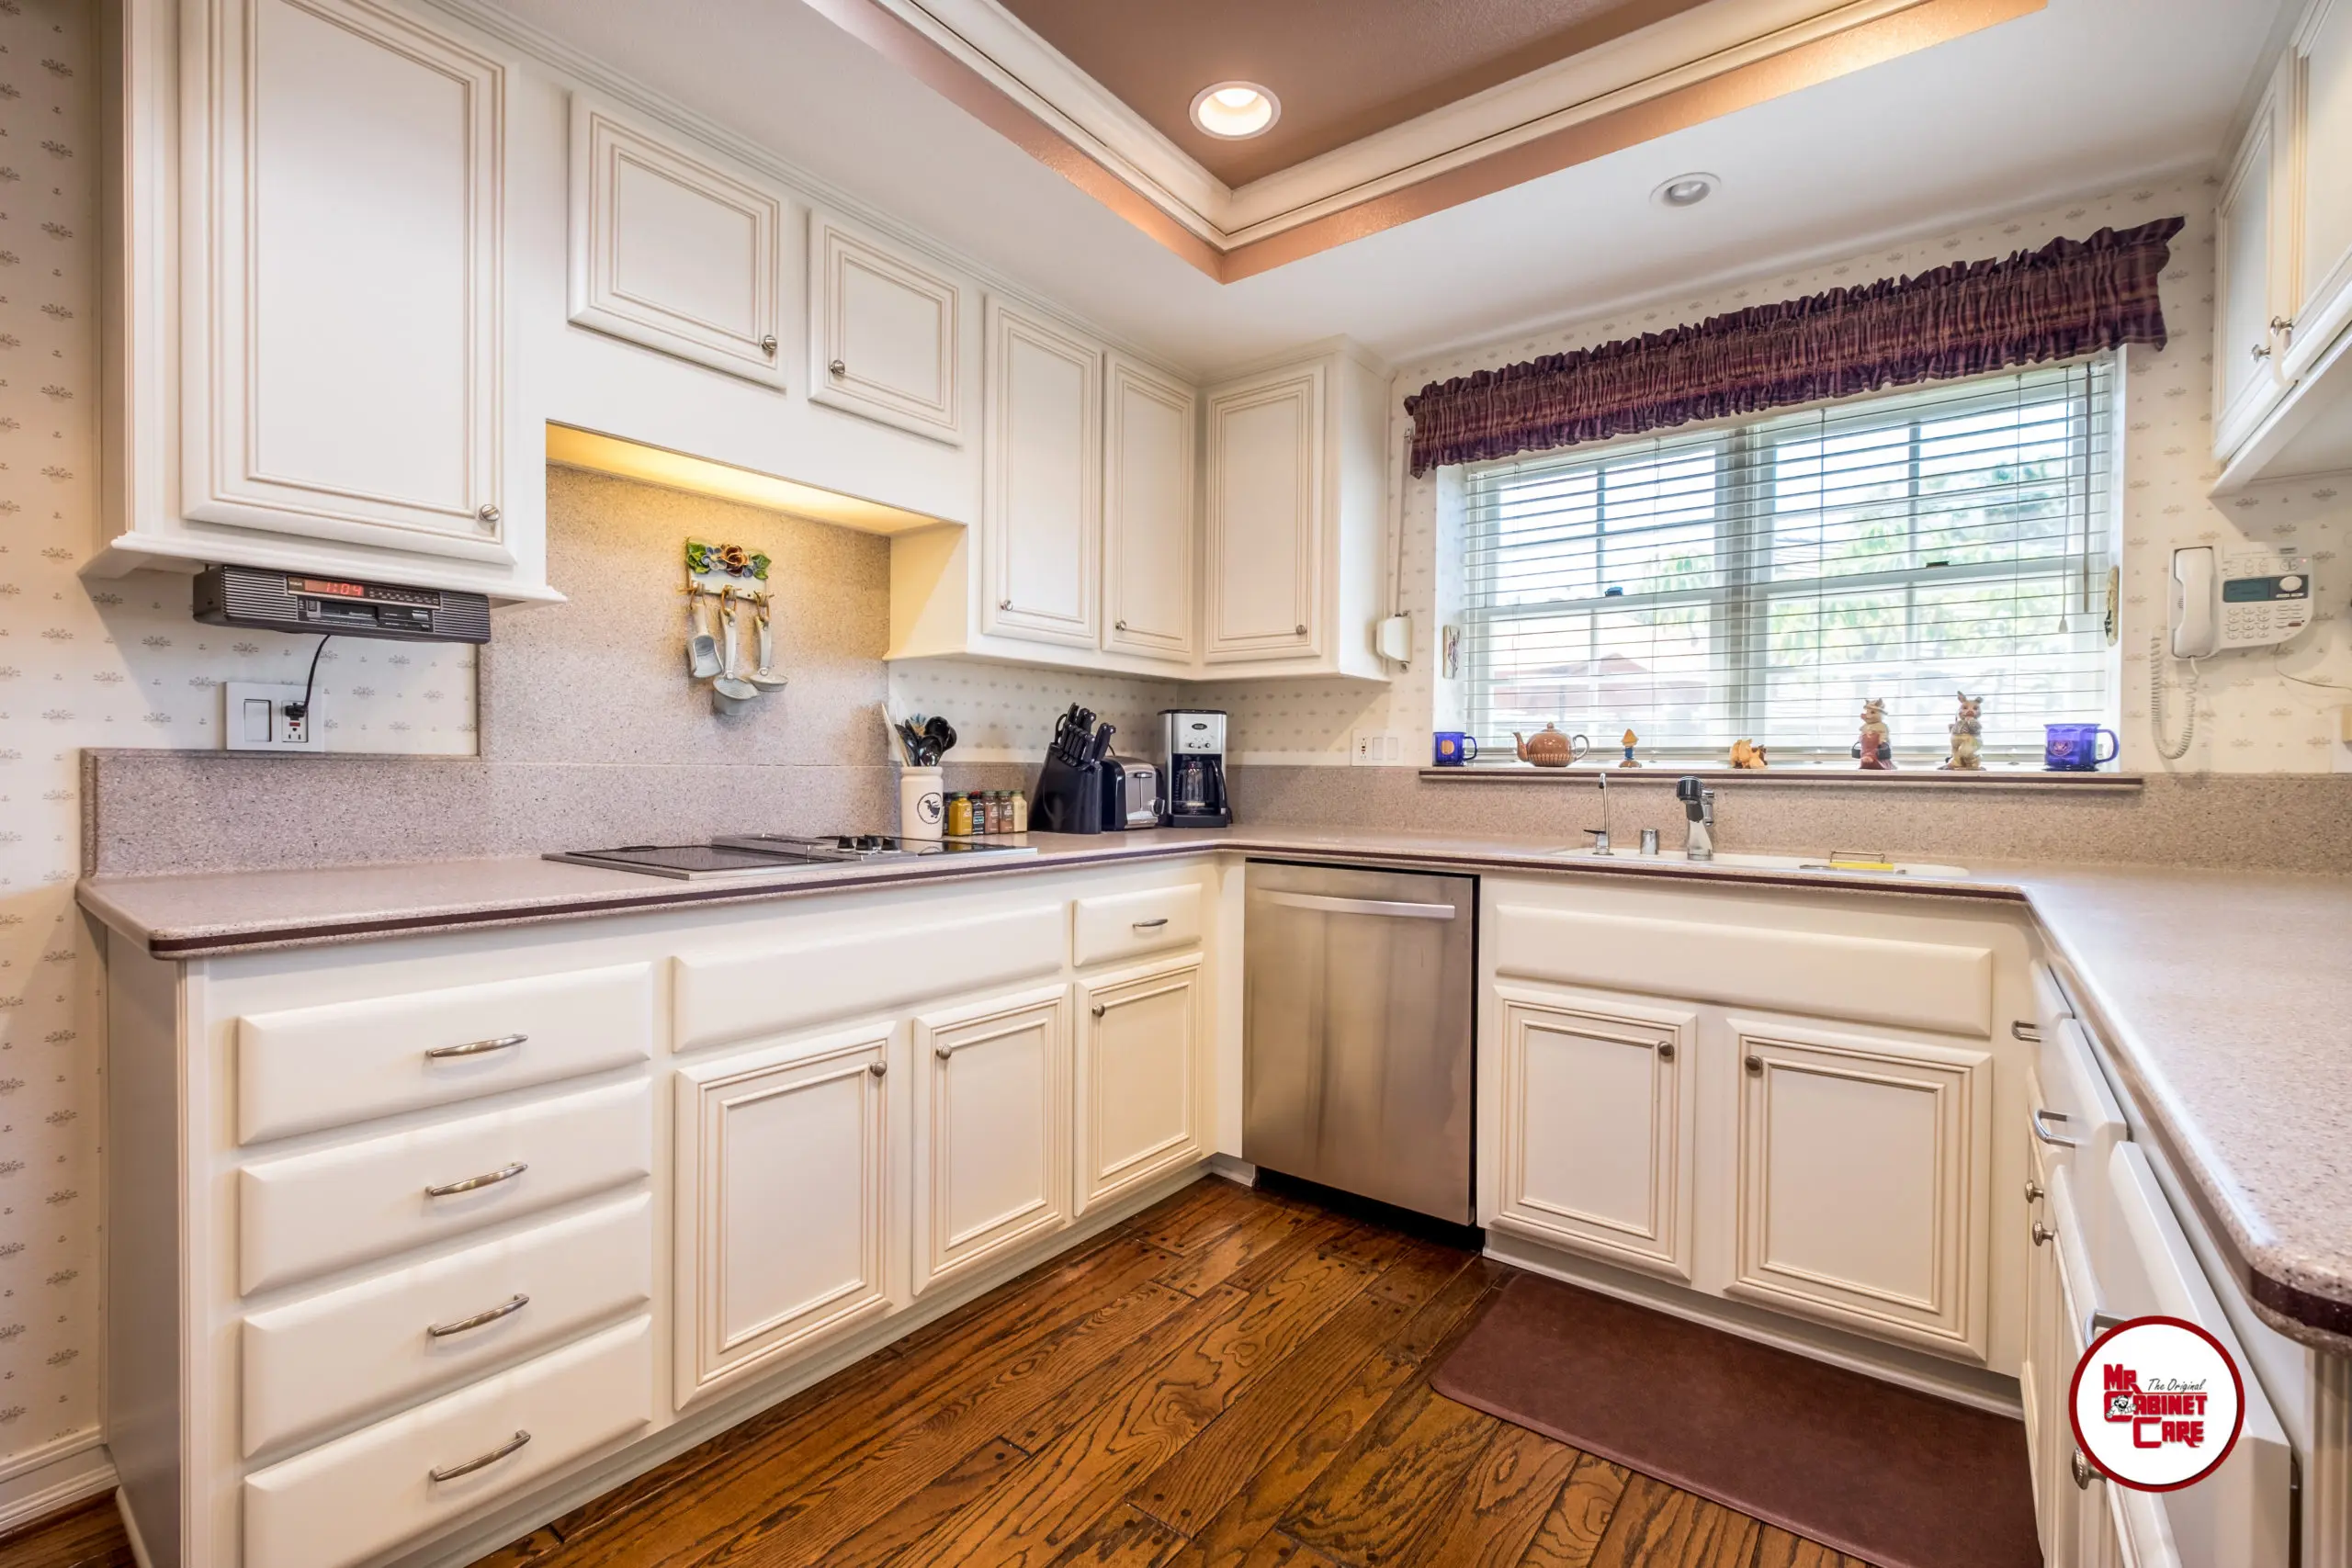 Breaking Down The Costs Of Cabinet Refacing, How Much Does Redoing Cabinets Cost